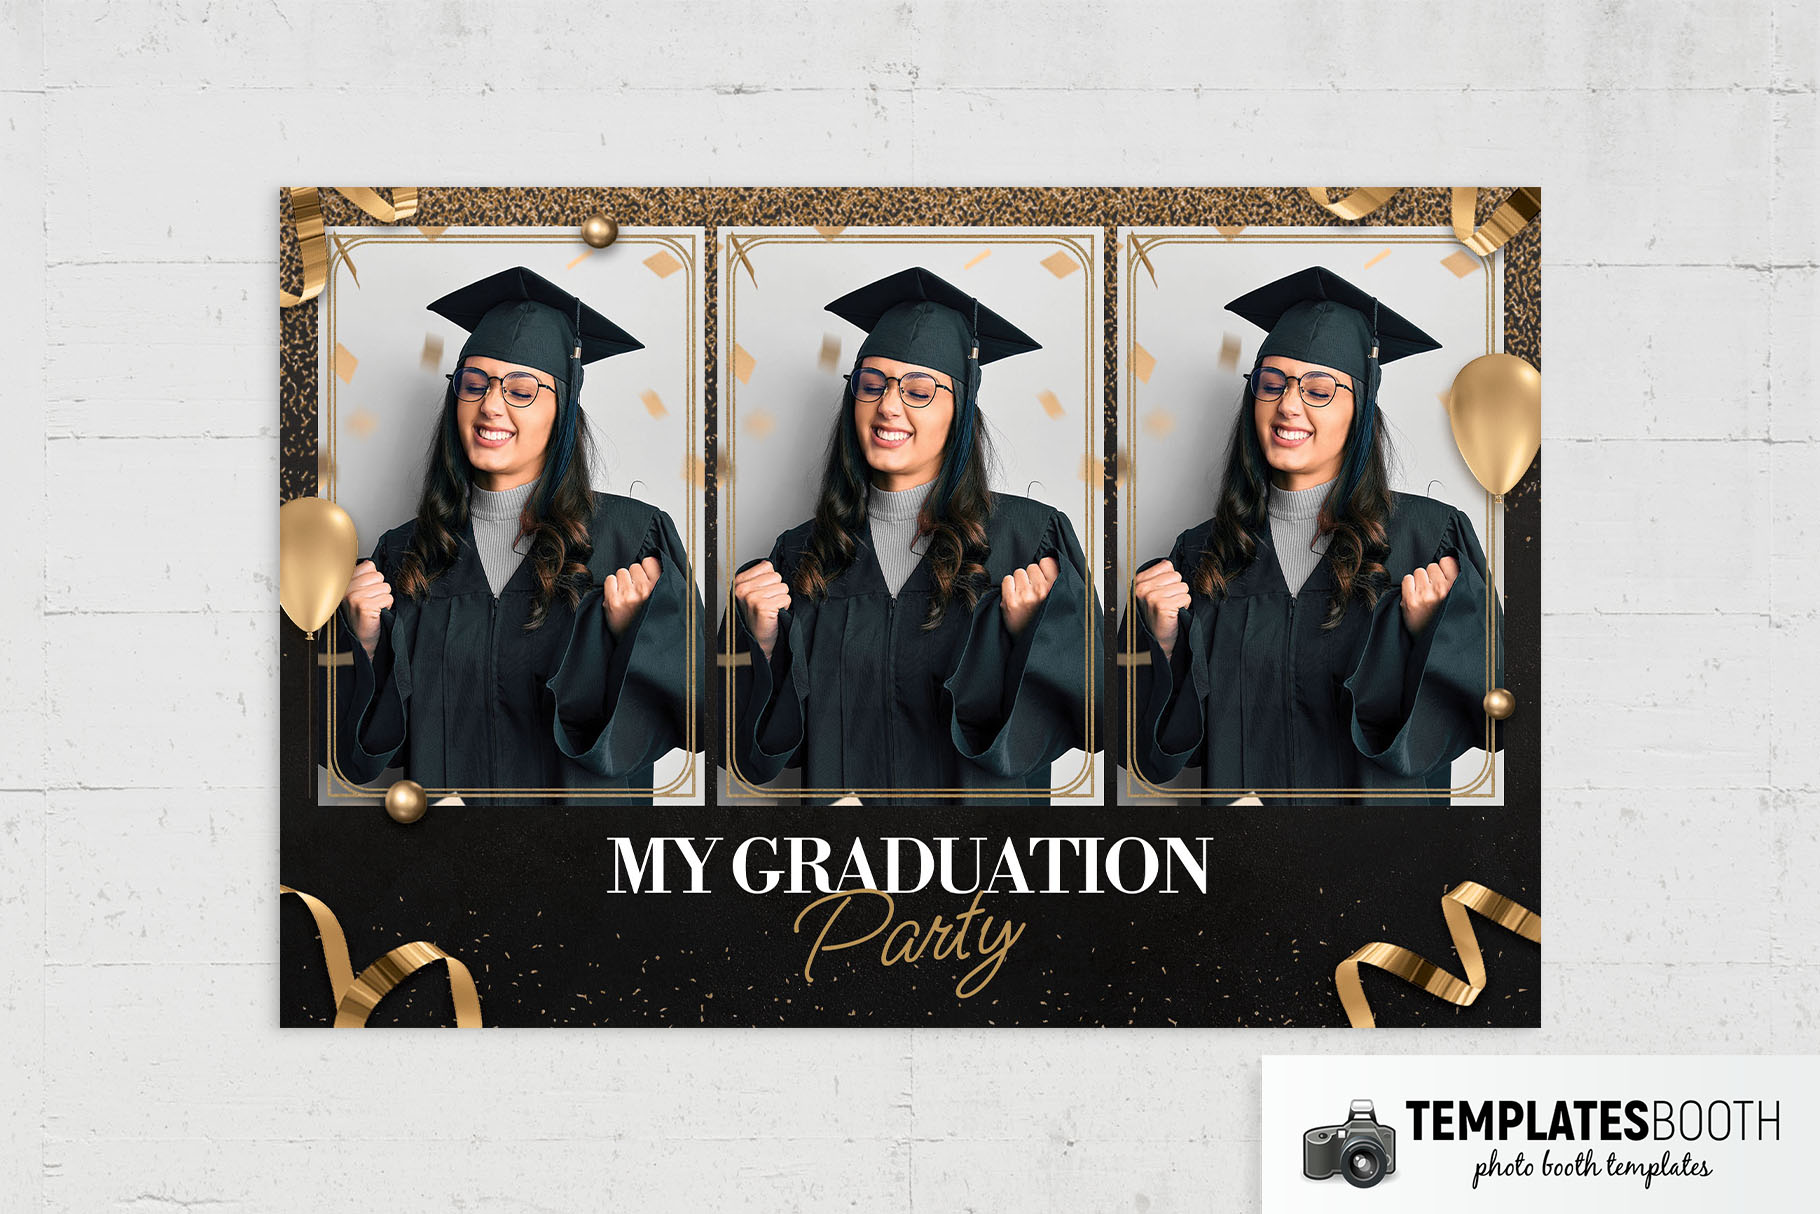 Graduation Party Photo Booth Template